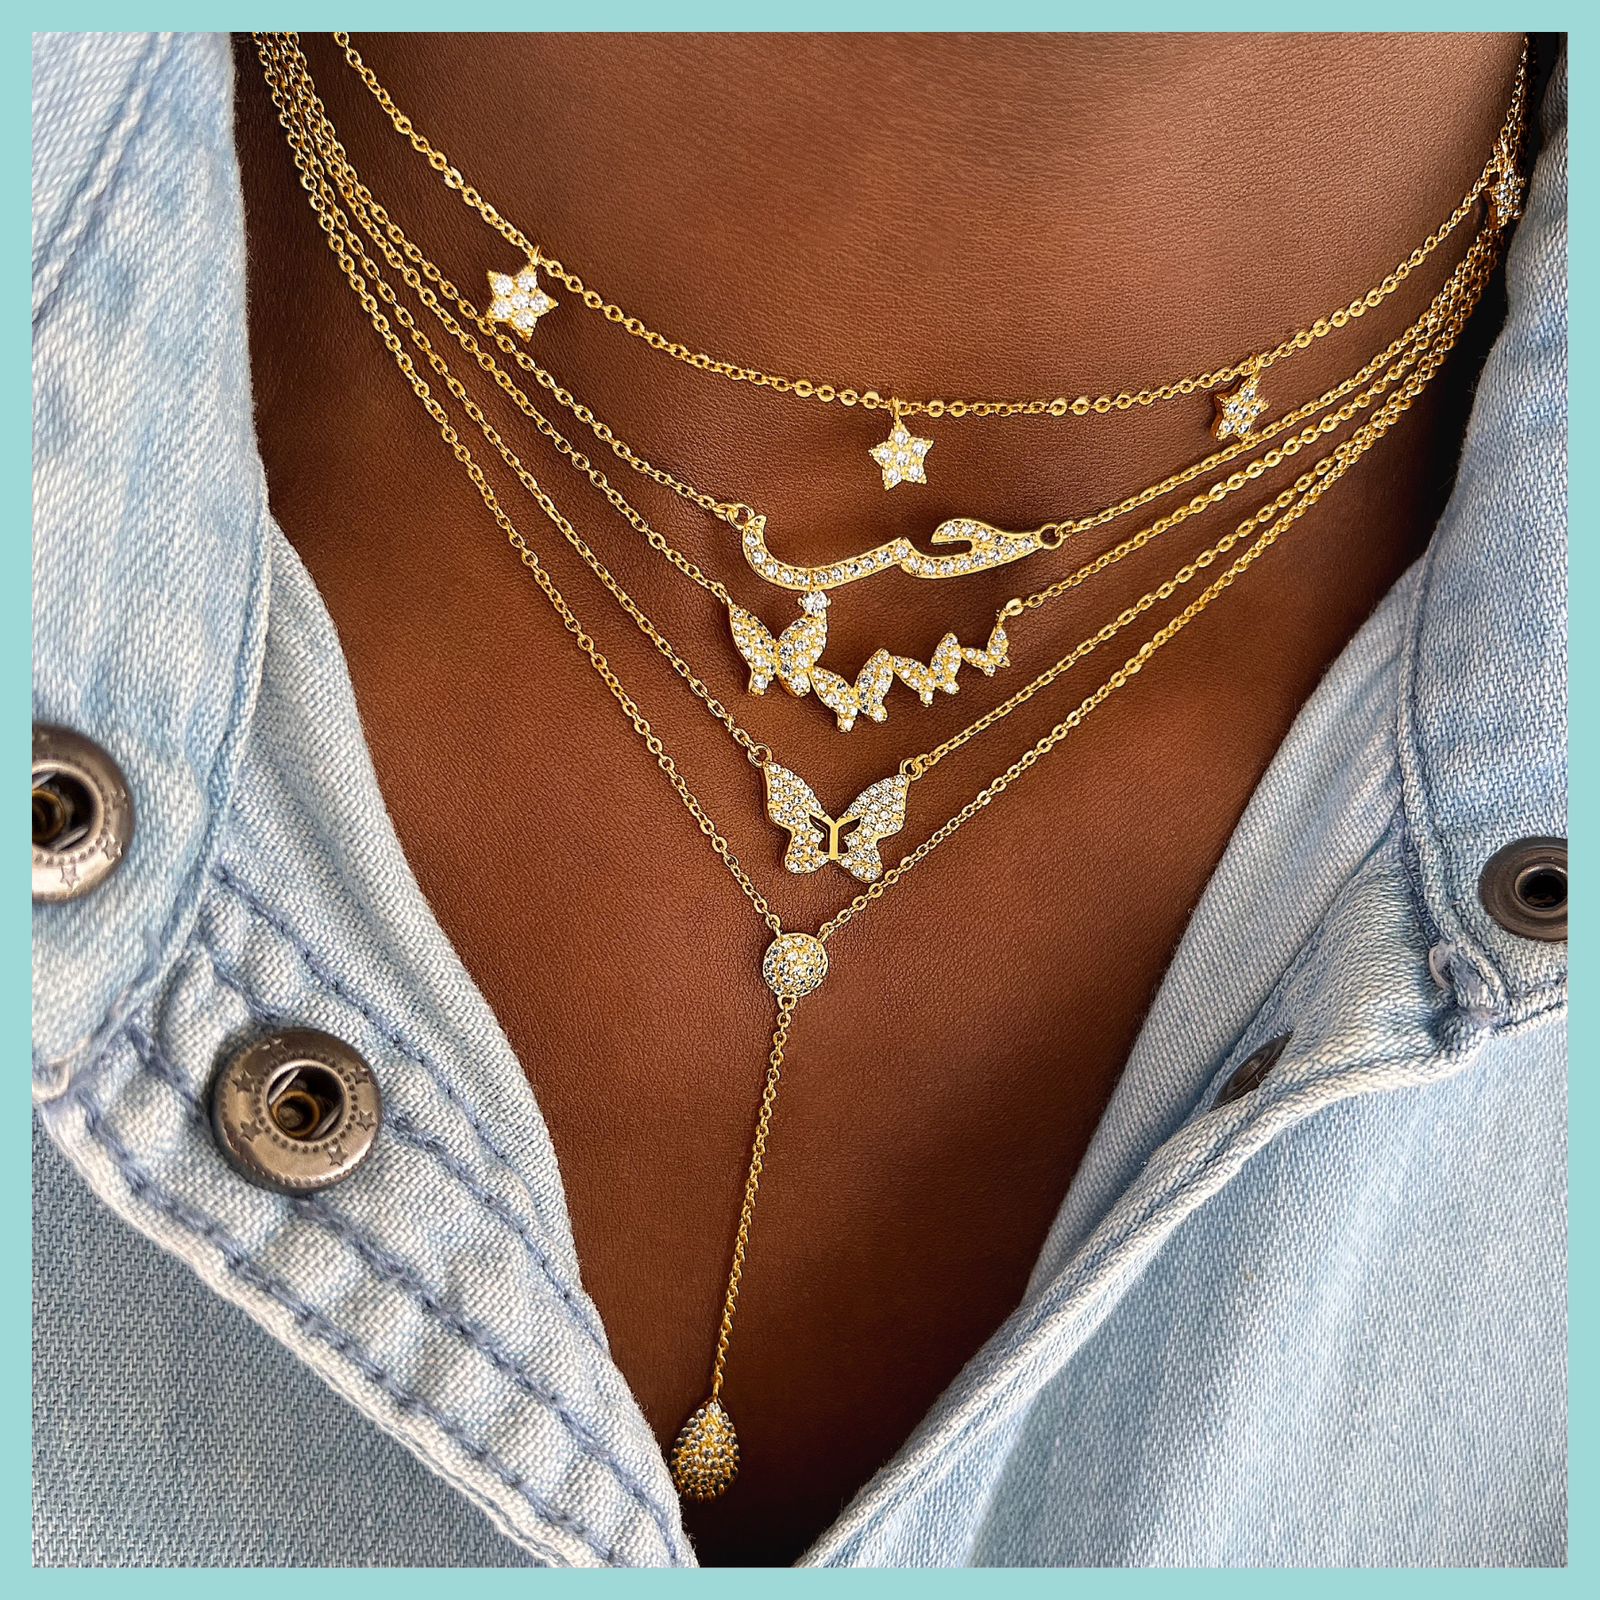 Basic Fairly Butterflies Casual Necklace